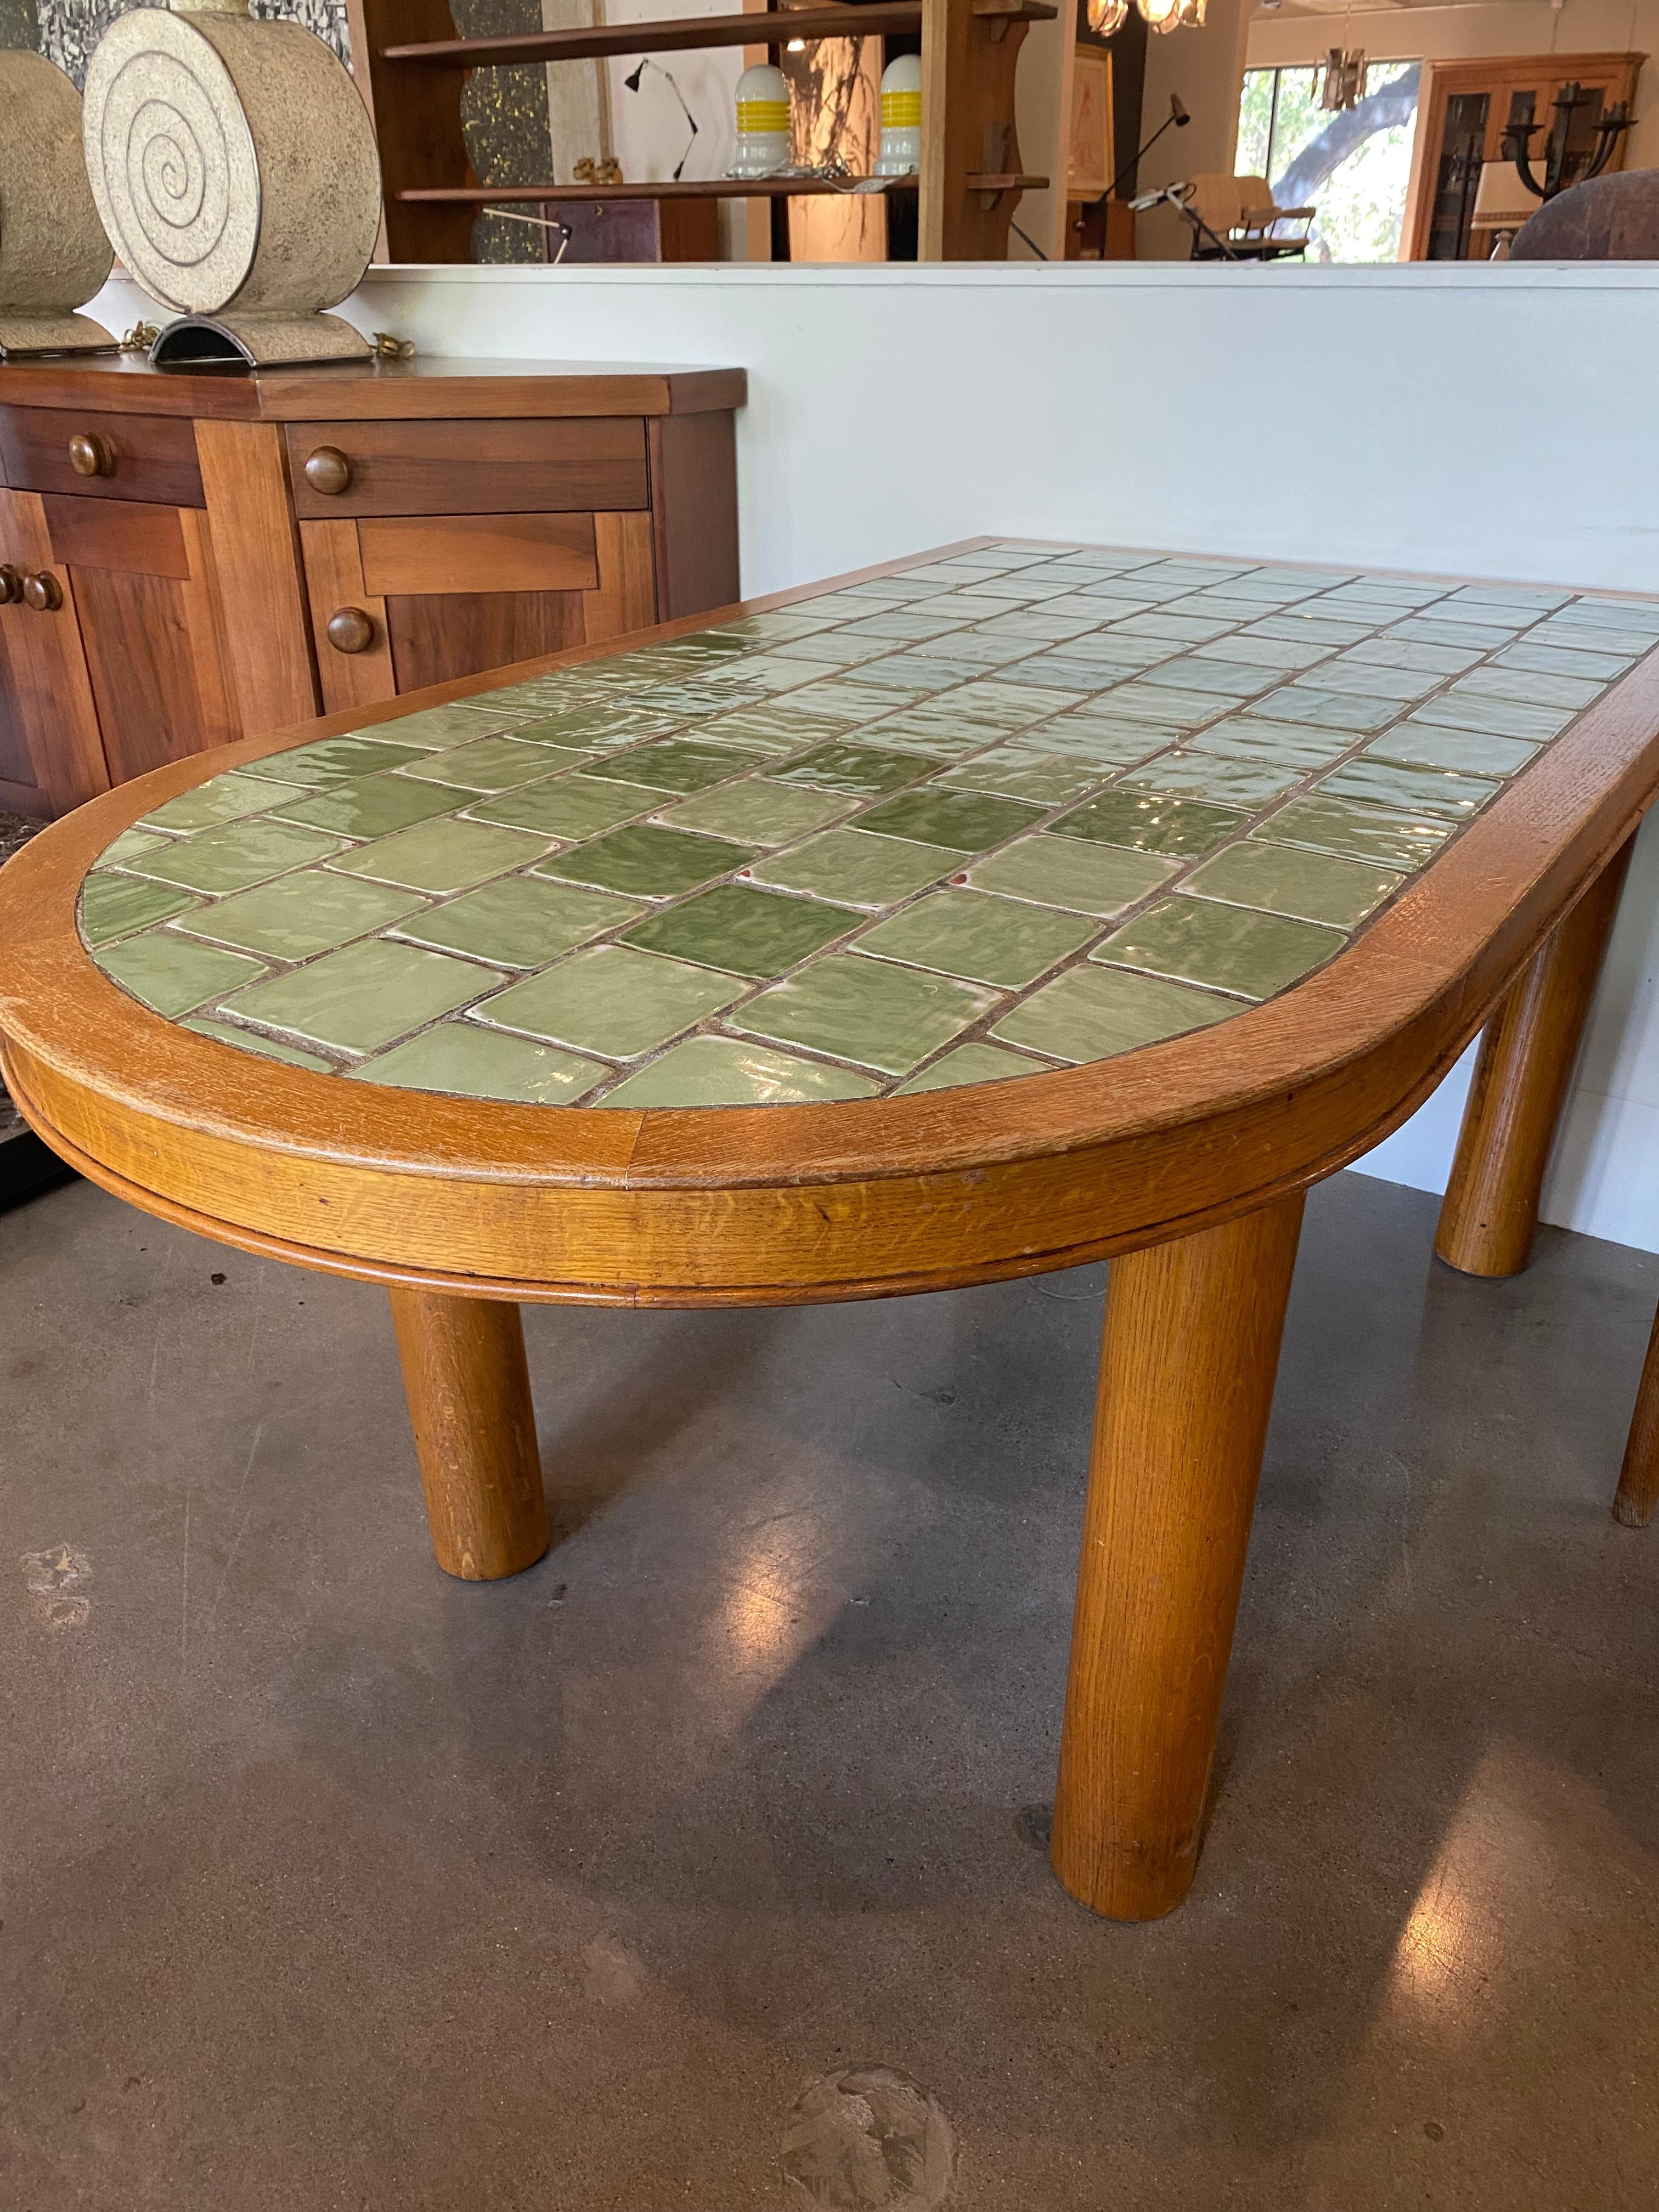 kitchen table with ceramic tile top